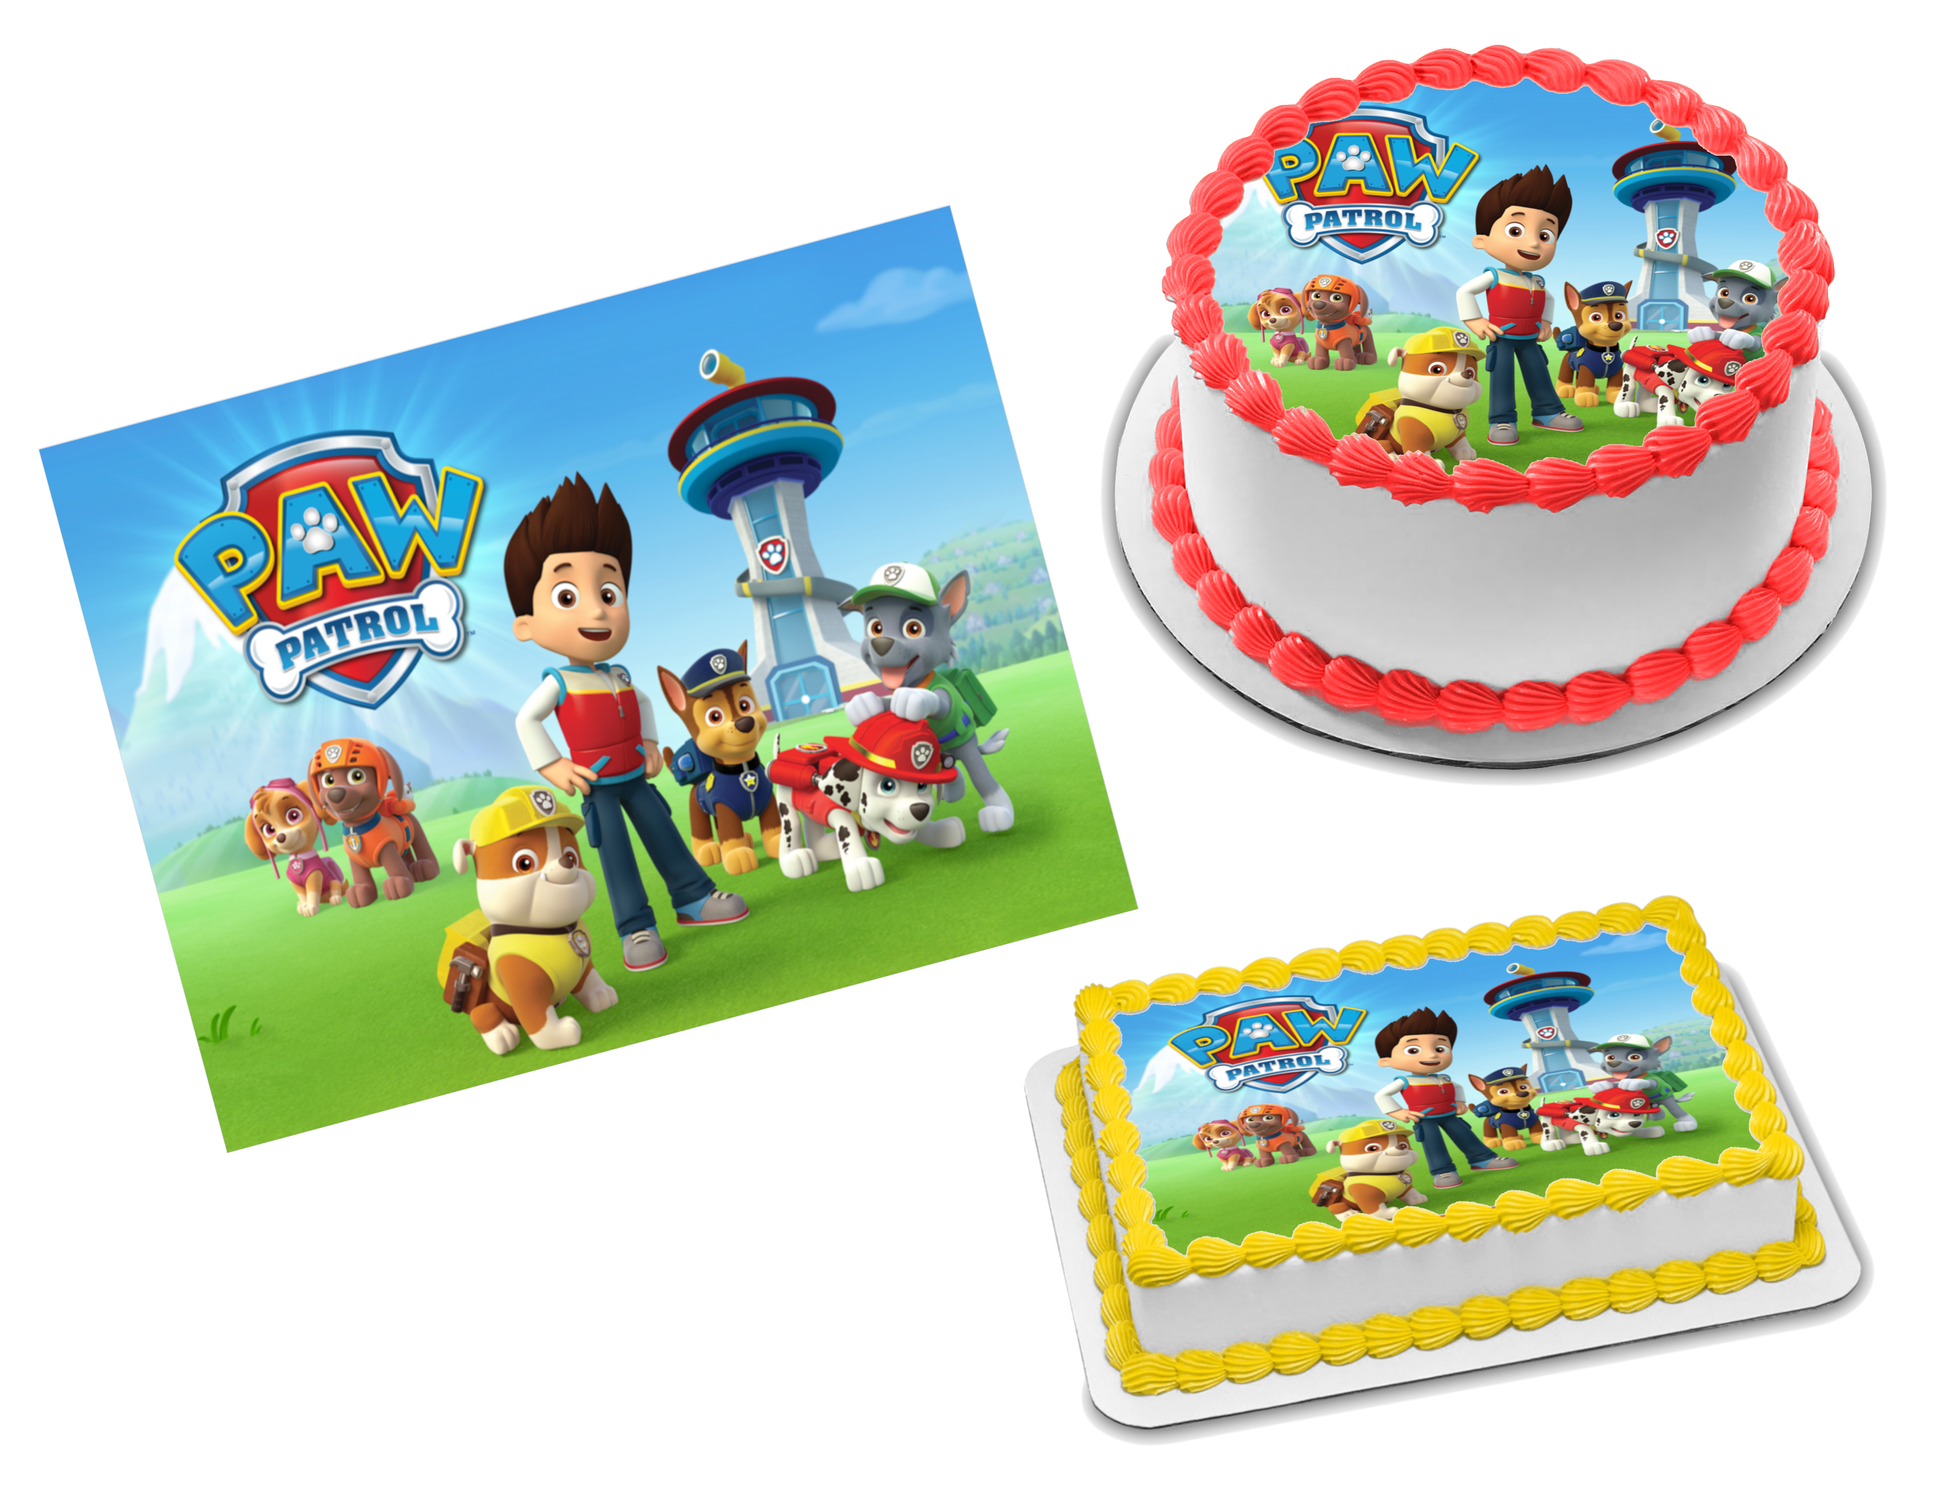 Paw Patrol Cut Out Edible Cake Toppers, Edible Picture